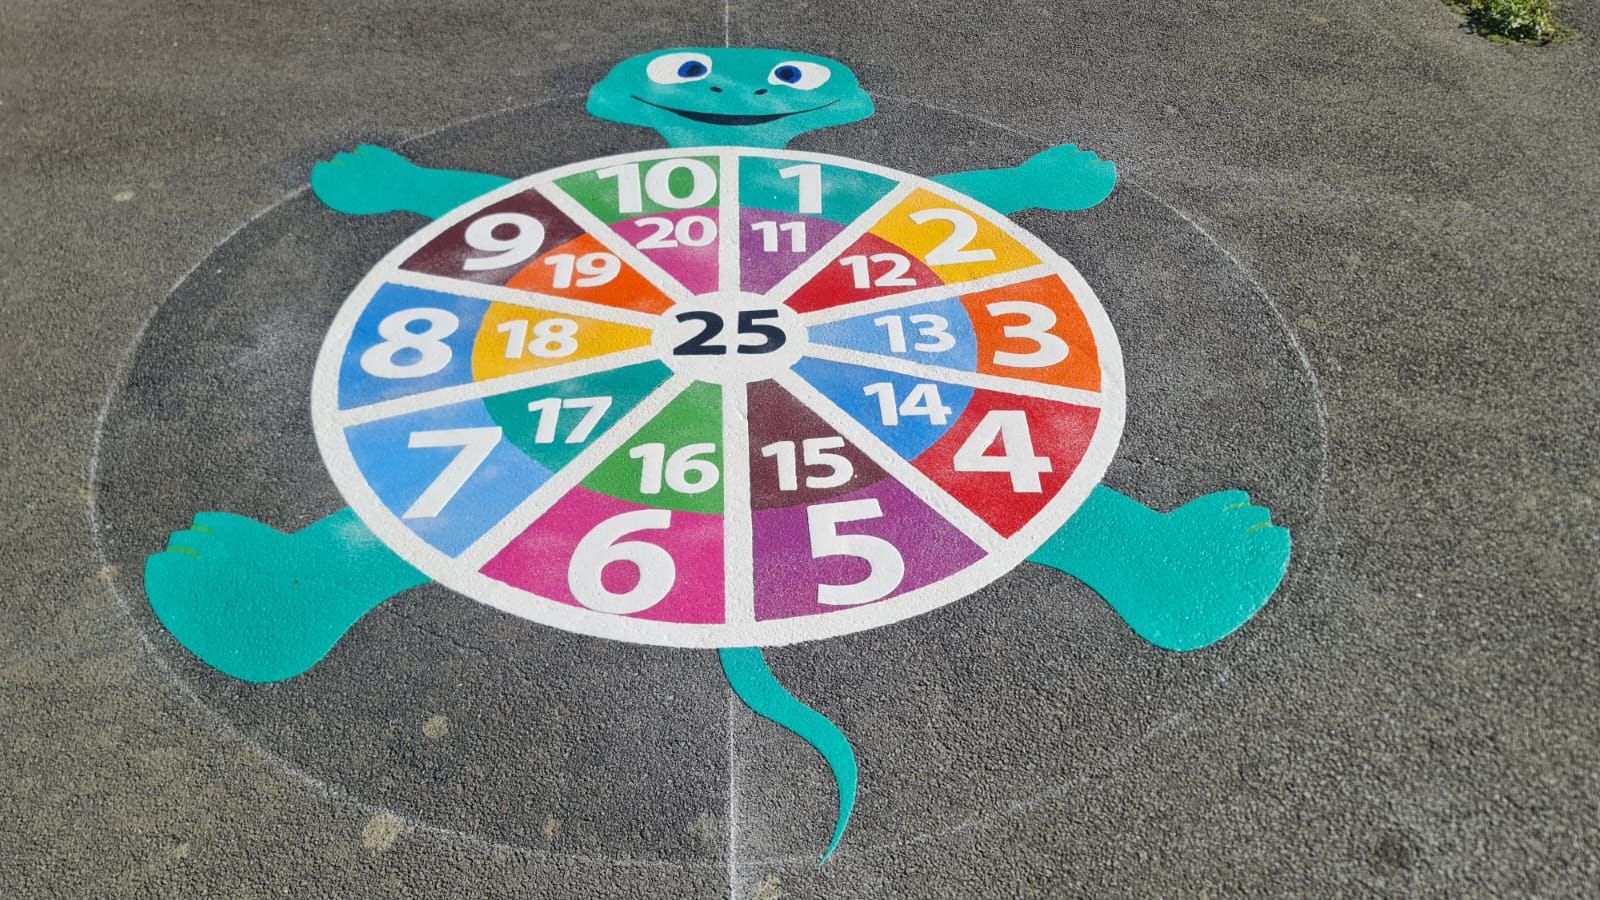 Starting the year with new markings for your play area